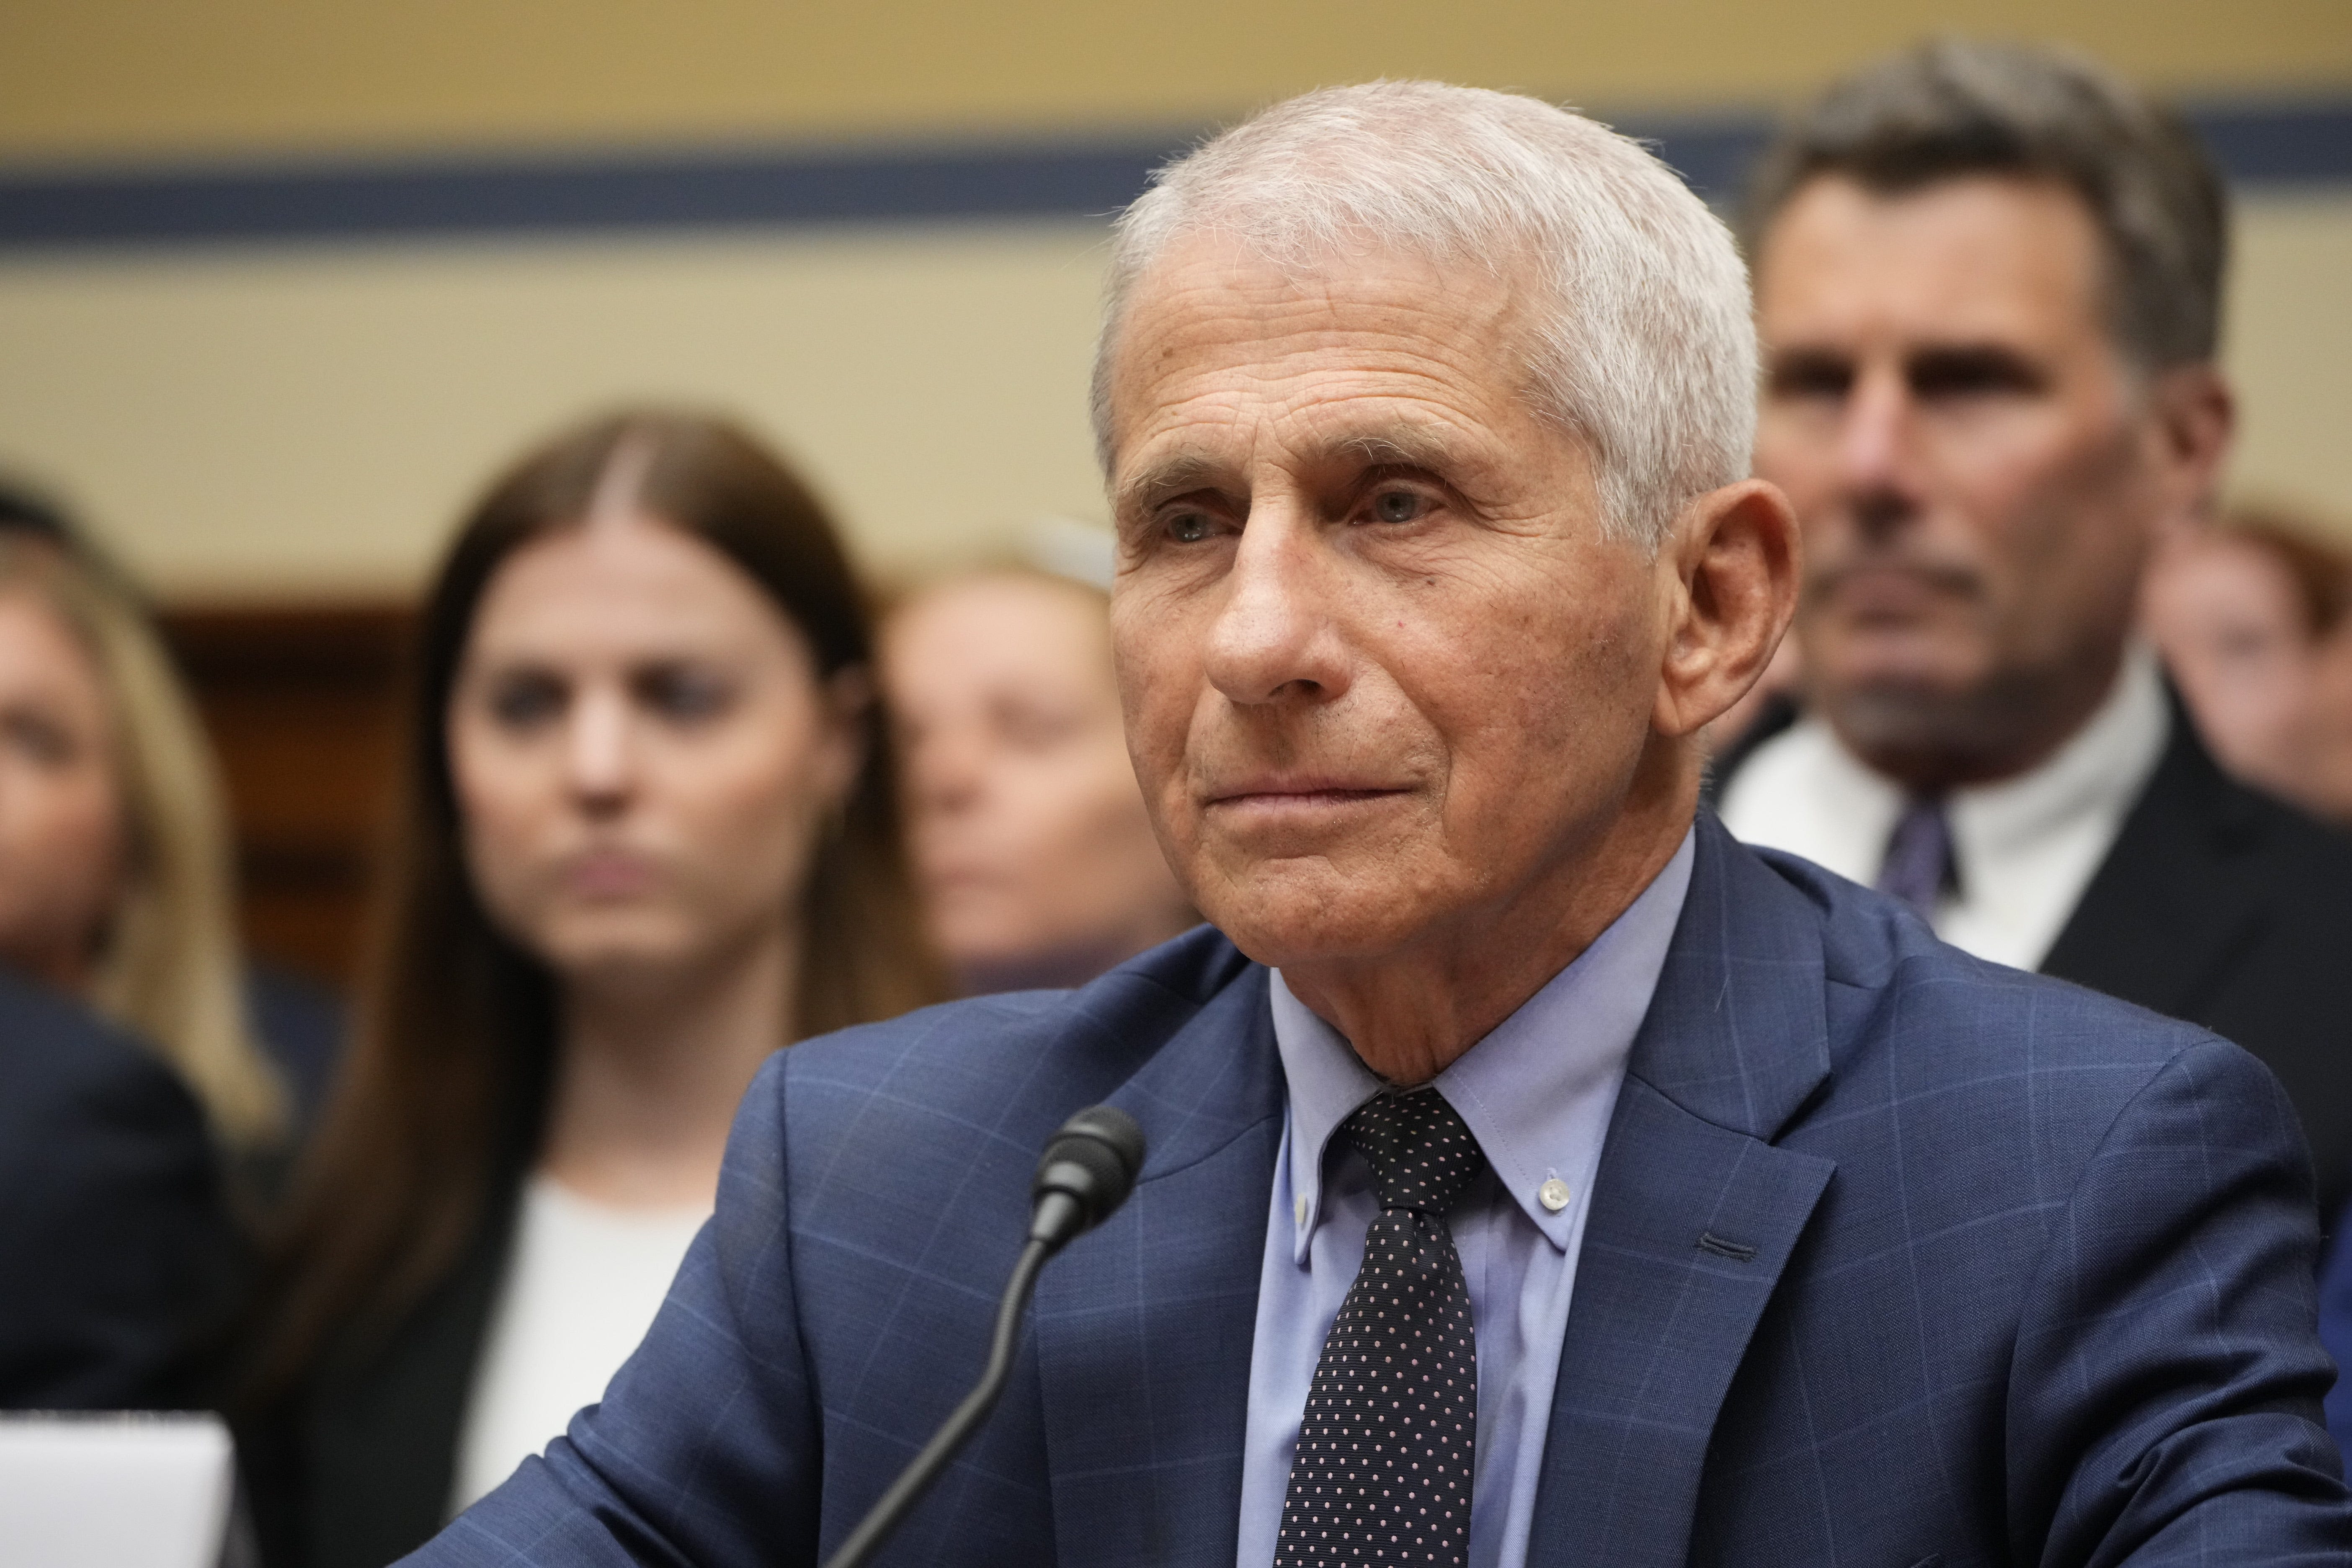 Anthony Fauci faces questions during contentious COVID-19 hearing in the House